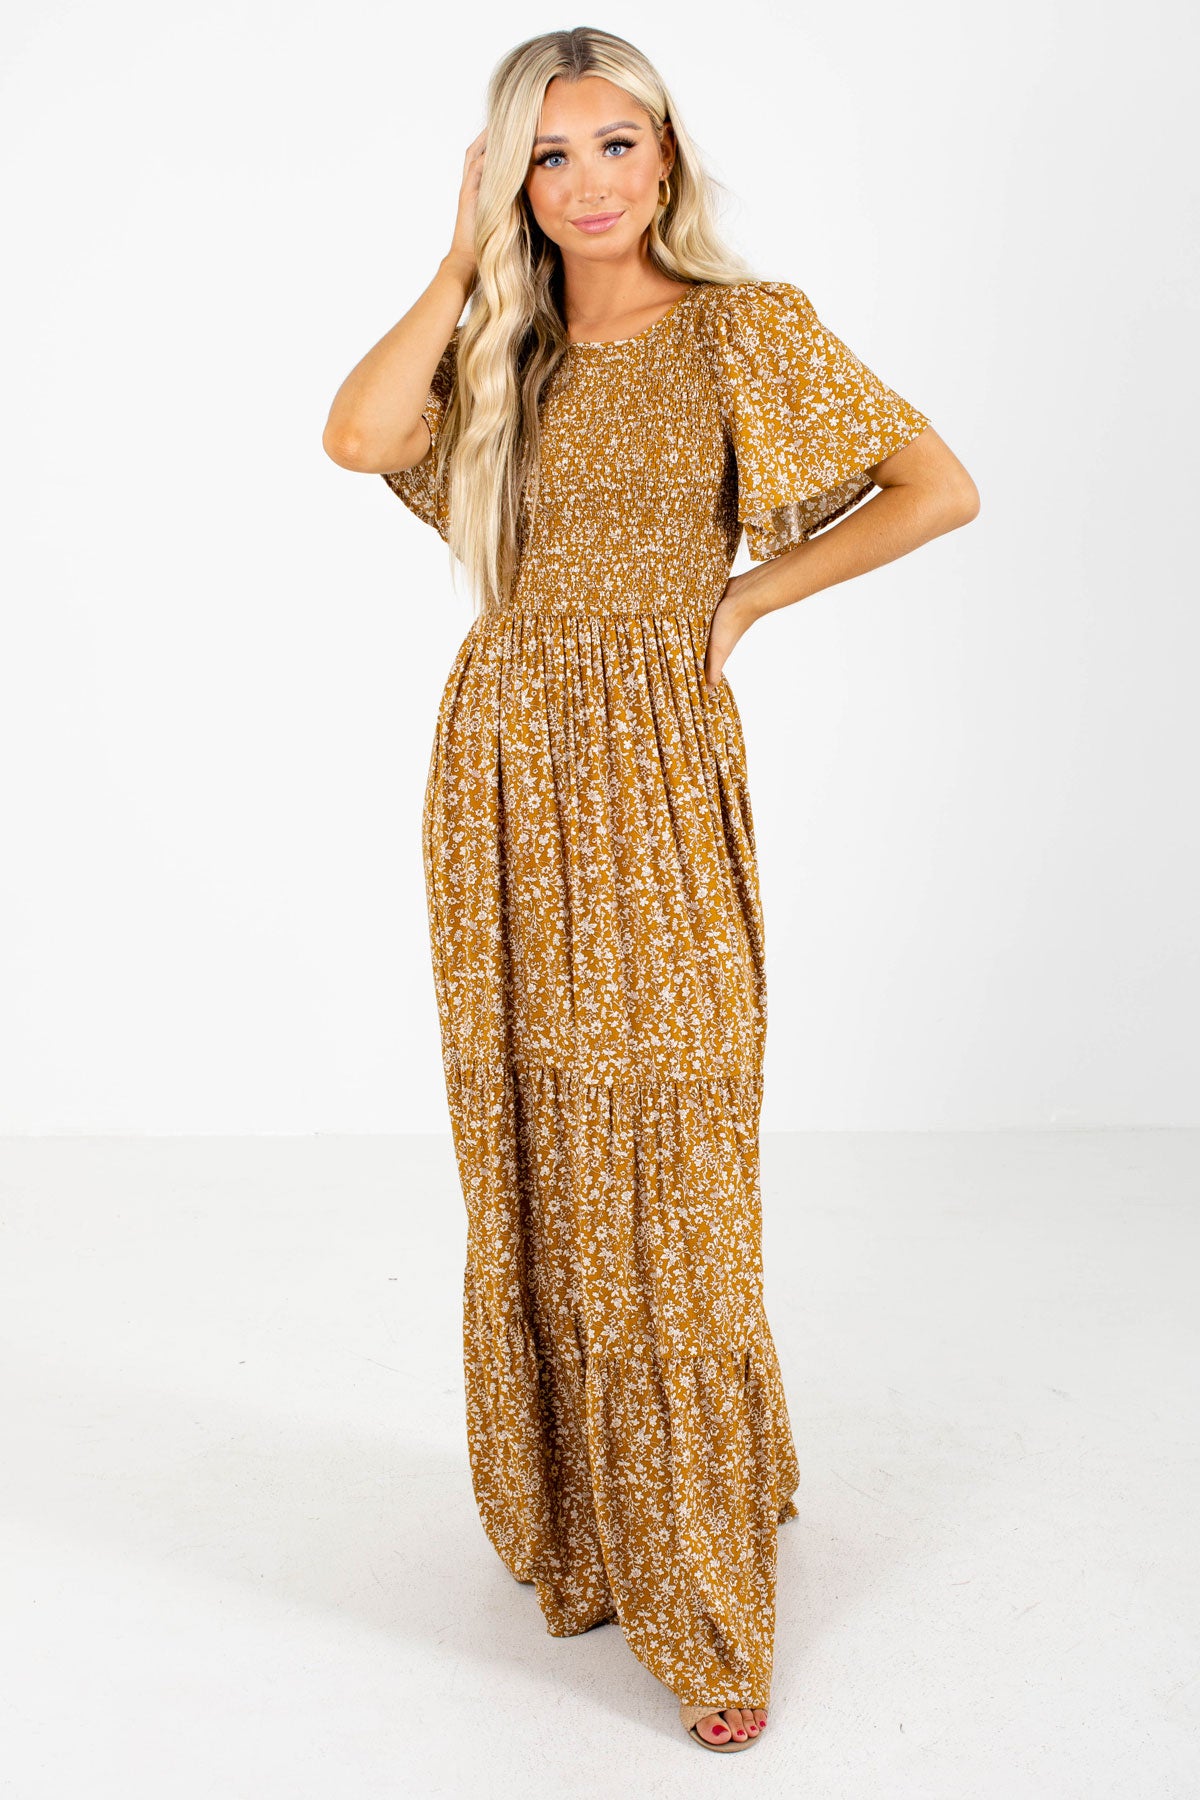 Mustard Yellow and White Floral Boutique Maxi Dresses for Women